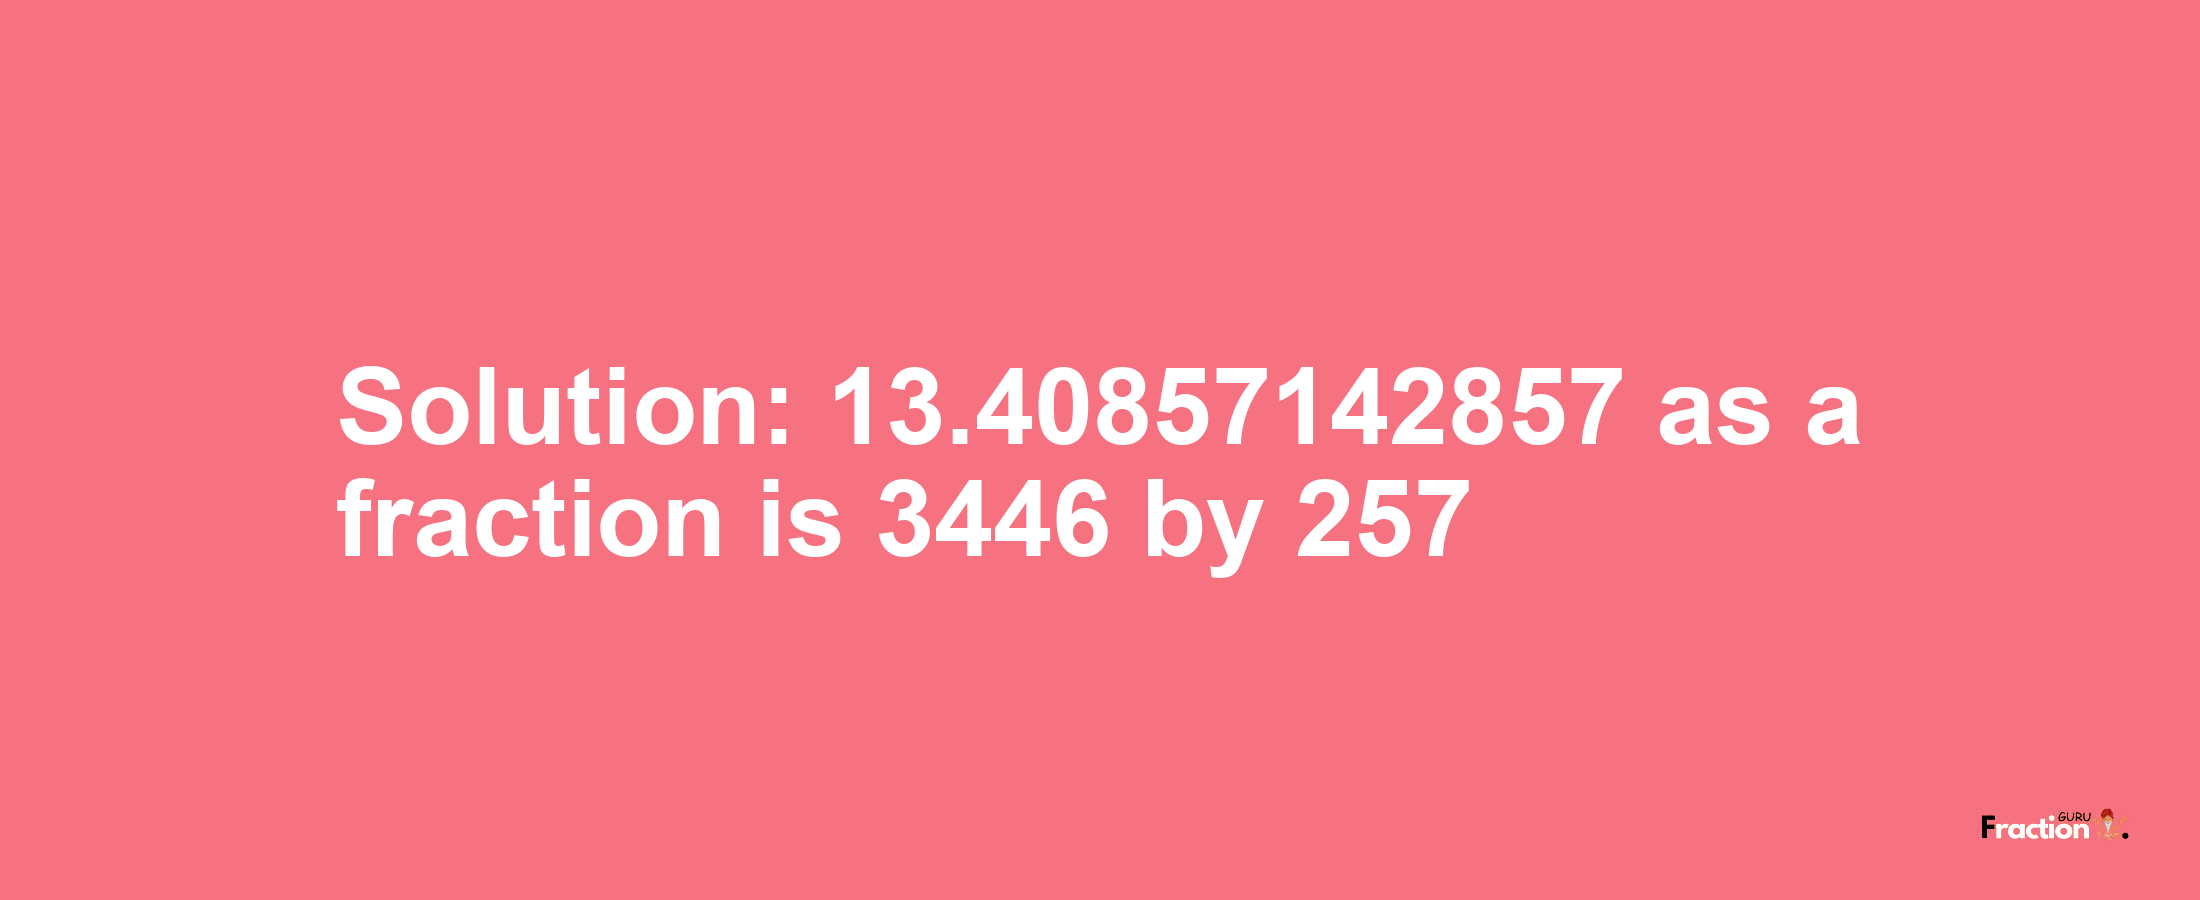 Solution:13.40857142857 as a fraction is 3446/257